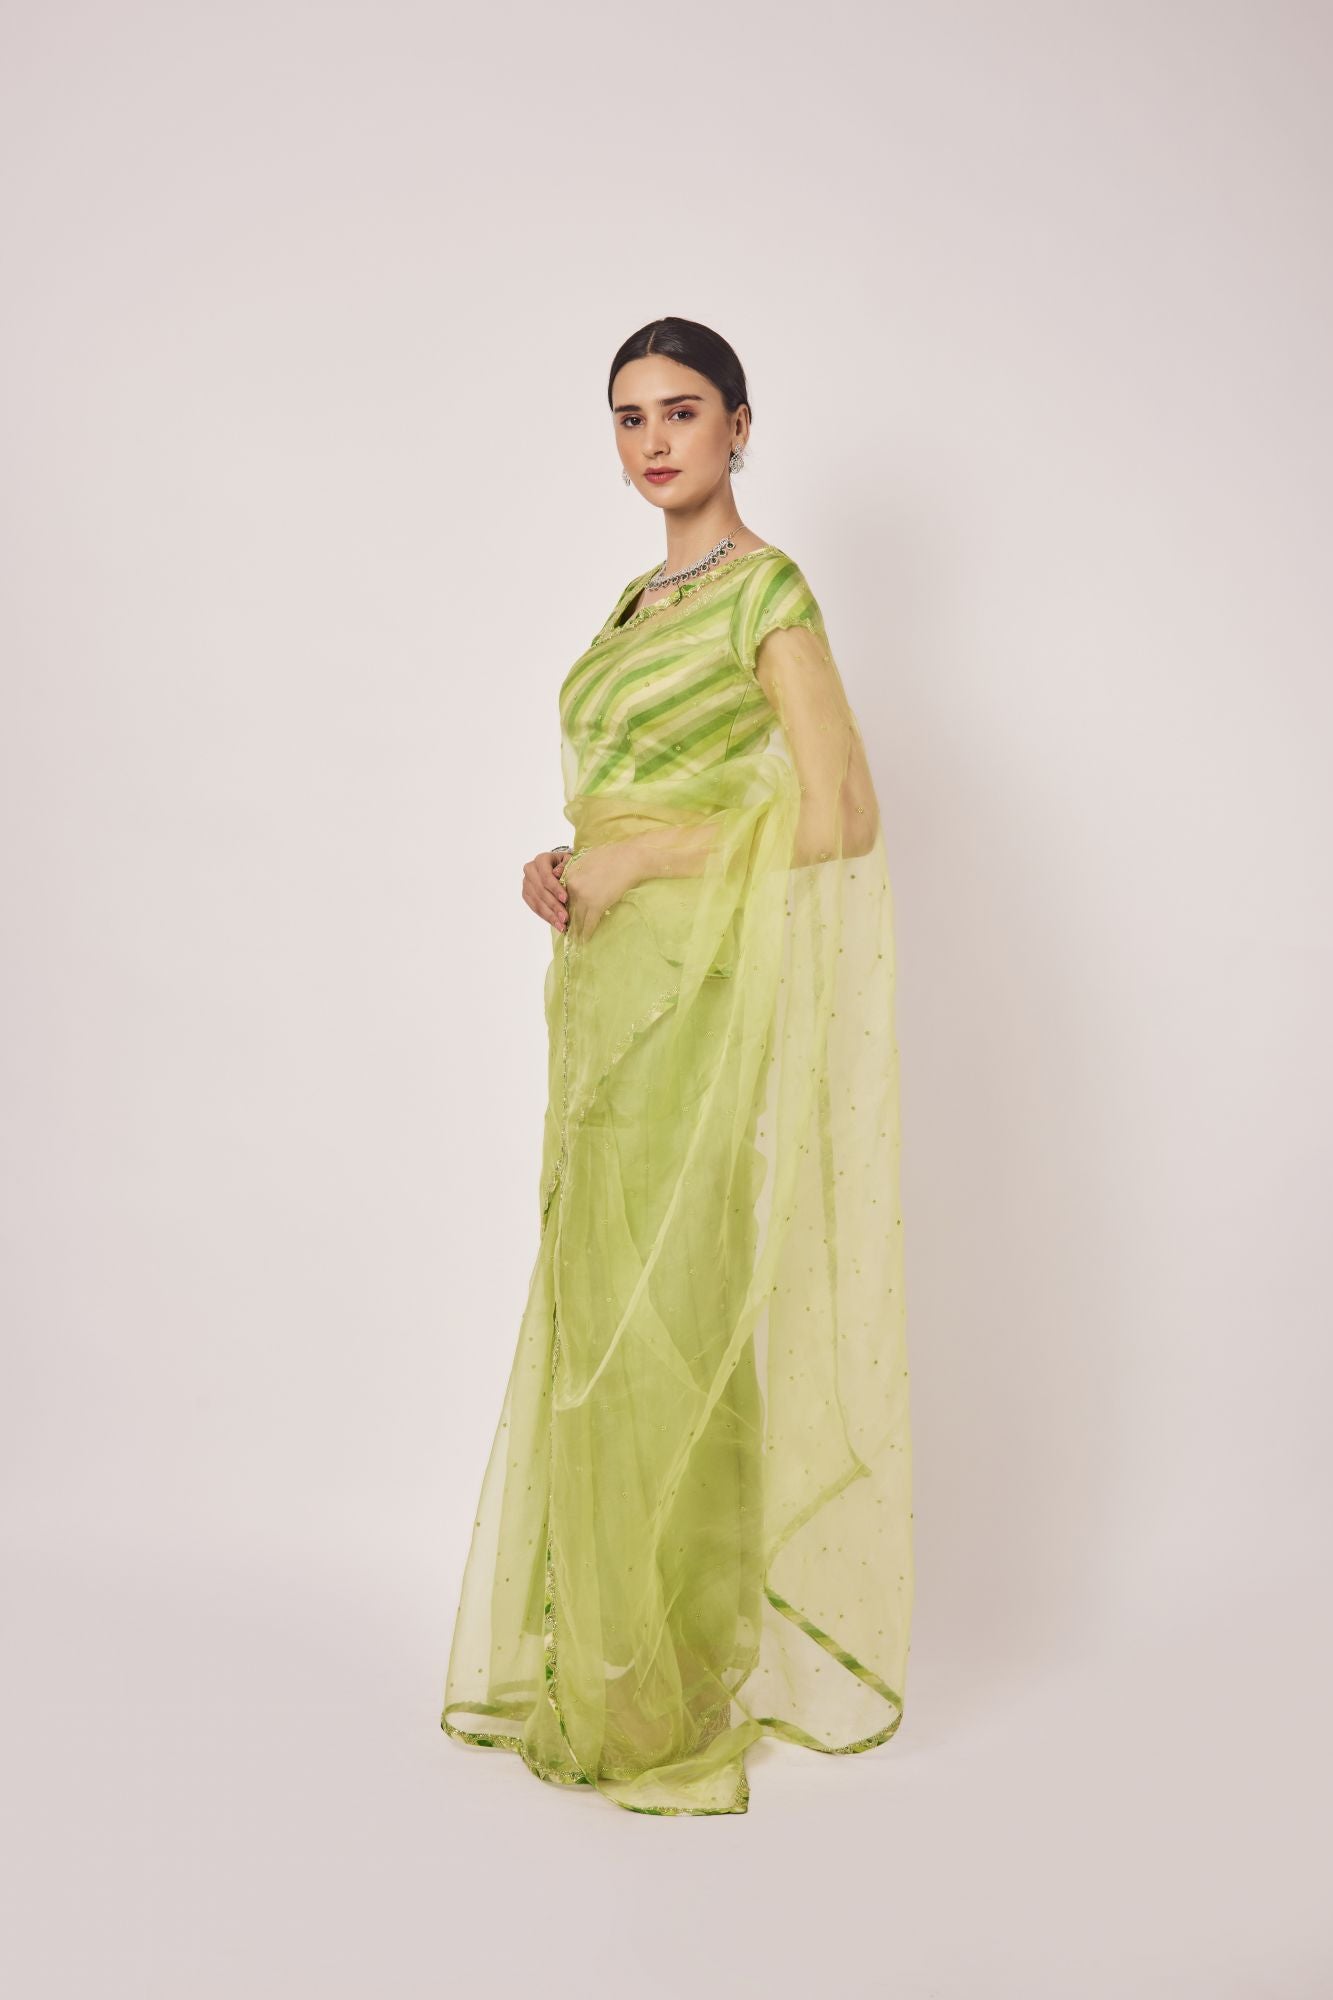 Buy pista green cutdana and pearl work organza sari online in USA. Make a fashion statement on festive occasions and weddings with designer sarees, designer suits, Indian dresses, Anarkali suits, palazzo suits, designer gowns, sharara suits, embroidered sarees from Pure Elegance Indian fashion store in USA.-pallu